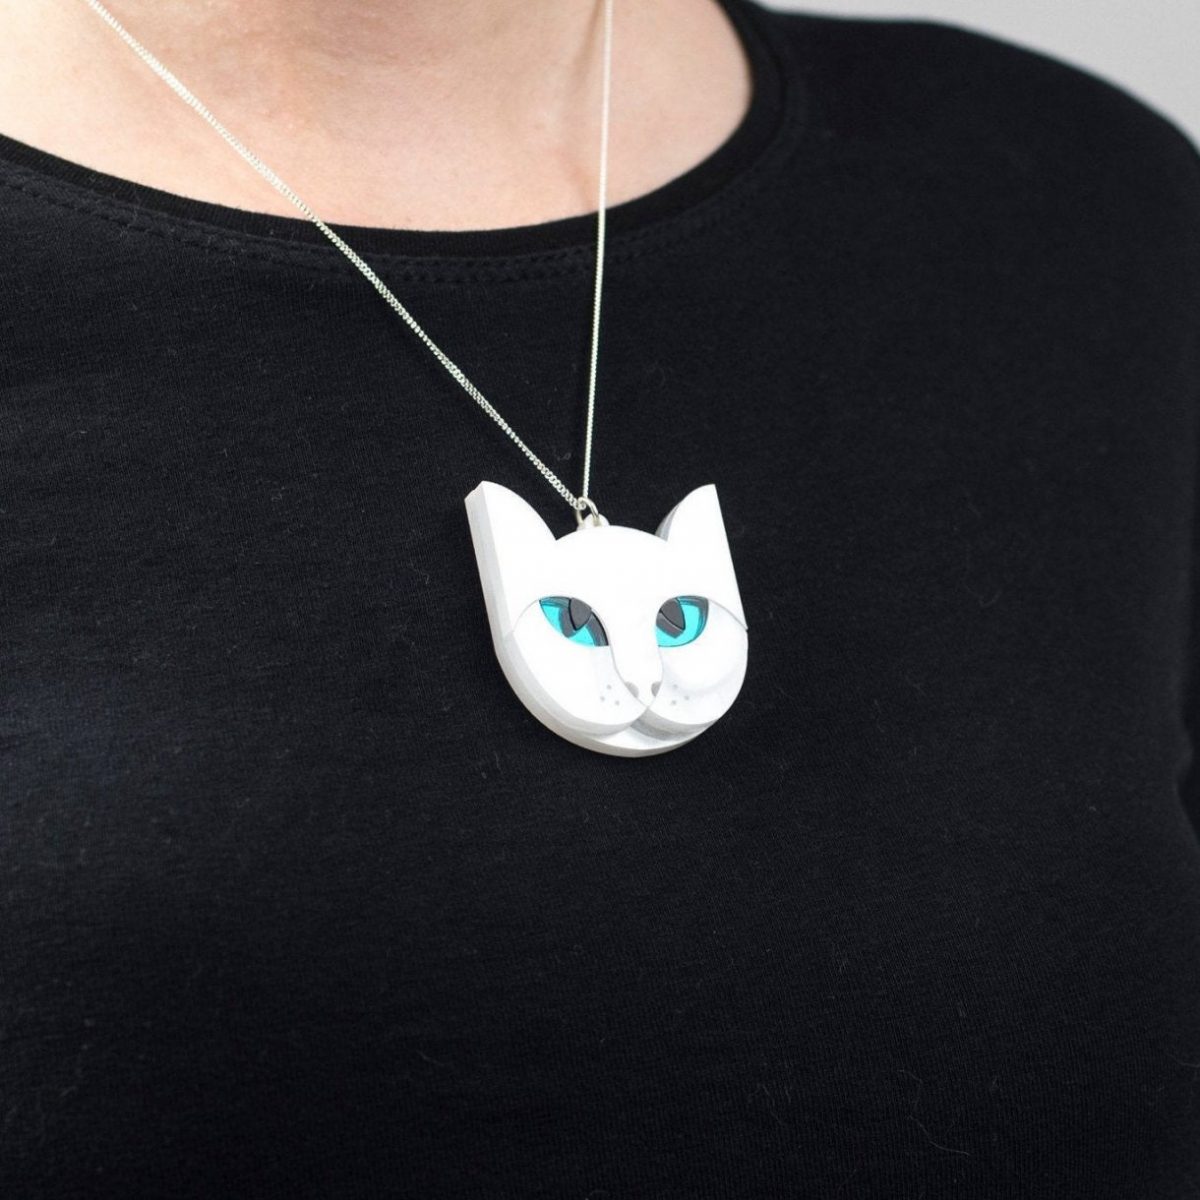 Cat Necklace, White Cat Jewellery, Acrylic Cat Pendant, Cat Lover Gift, Animal Pendant, Statement Necklace, Laser Cut Acrylic, Laura Danby